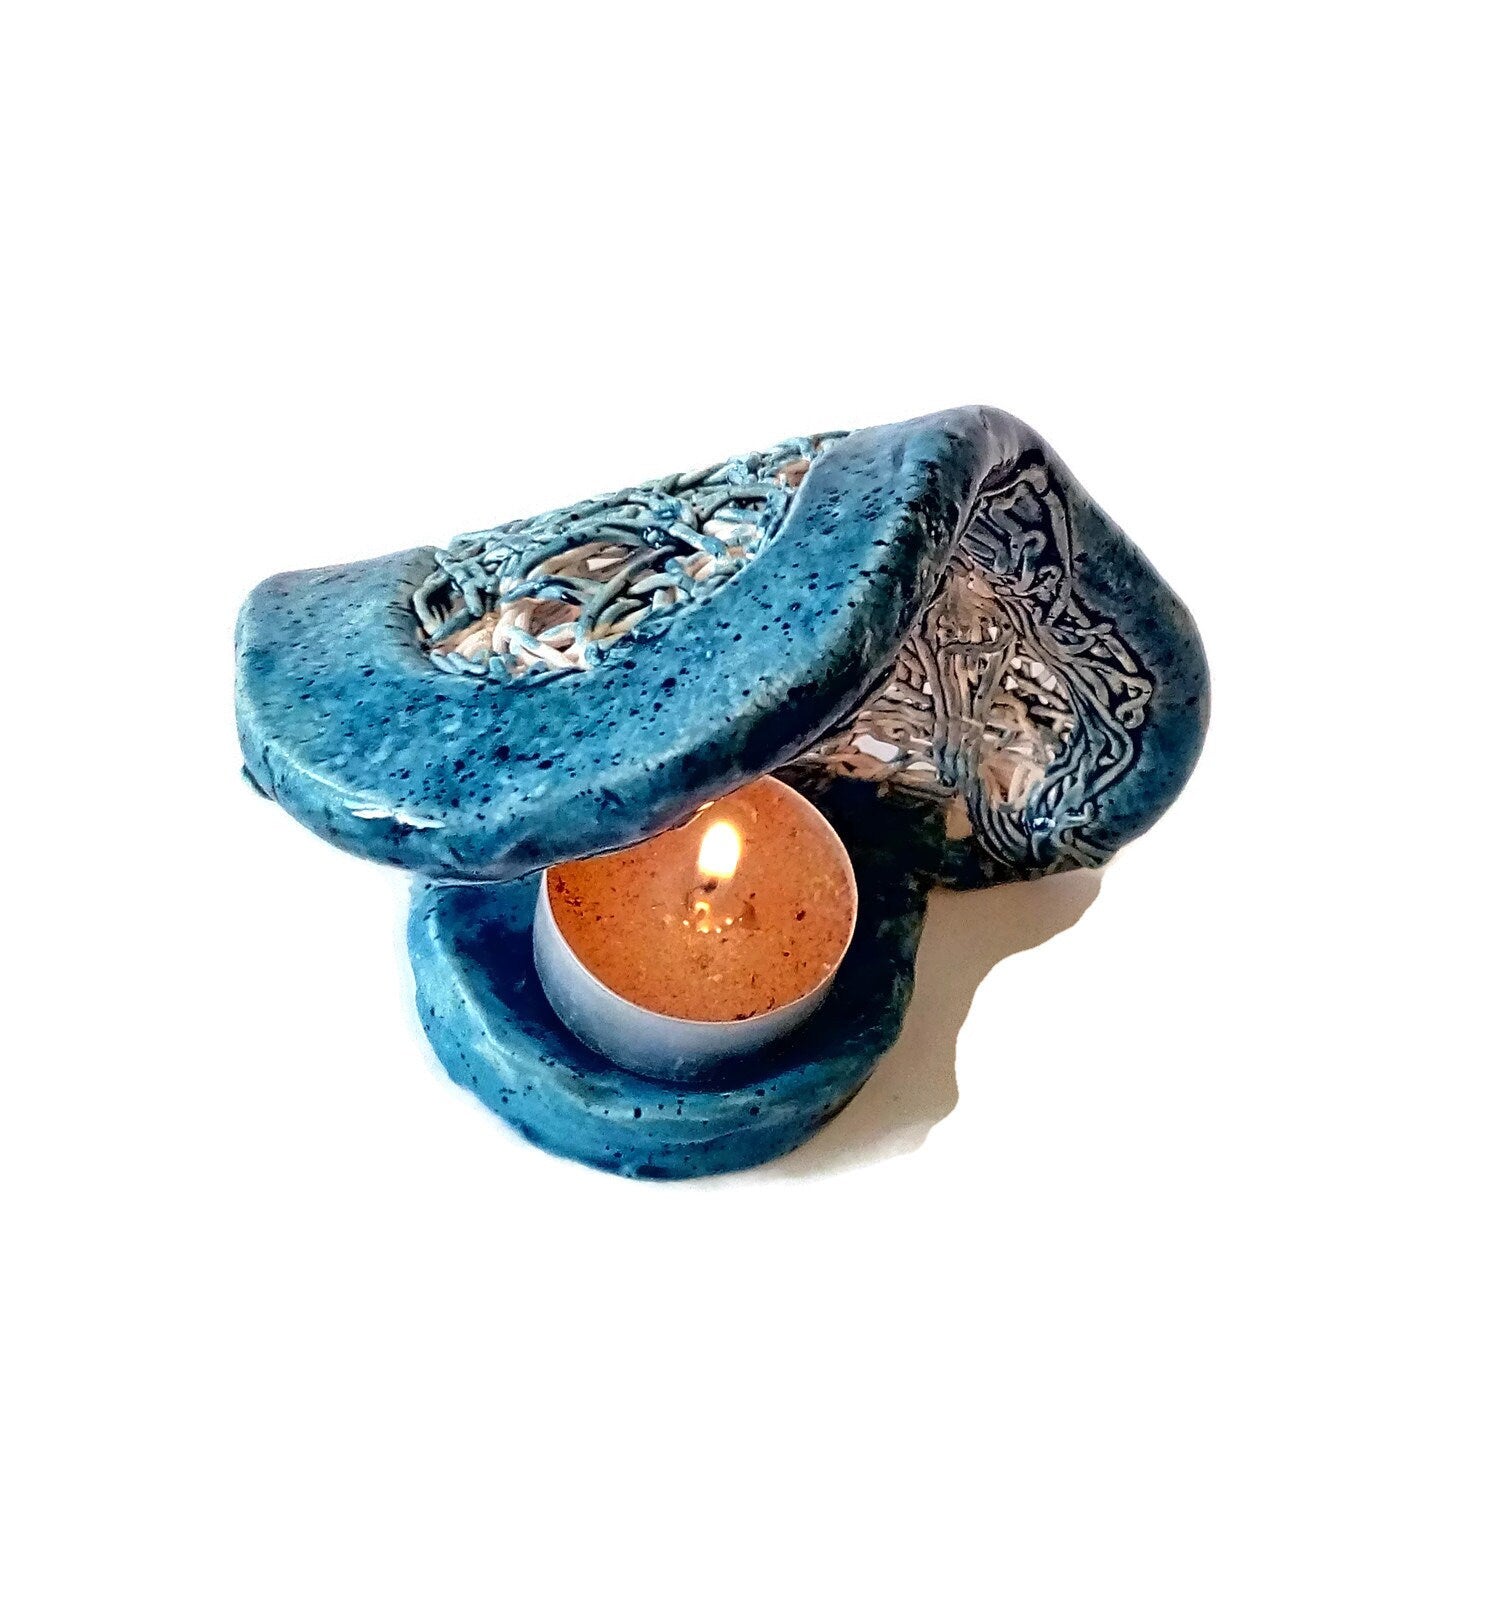 Votive Candle Holder, Modern Candle Holder, Handmade Ceramic Tea Light Holder, Top Selling Items, Unique Gift For Best Friend, Just Because - Ceramica Ana Rafael